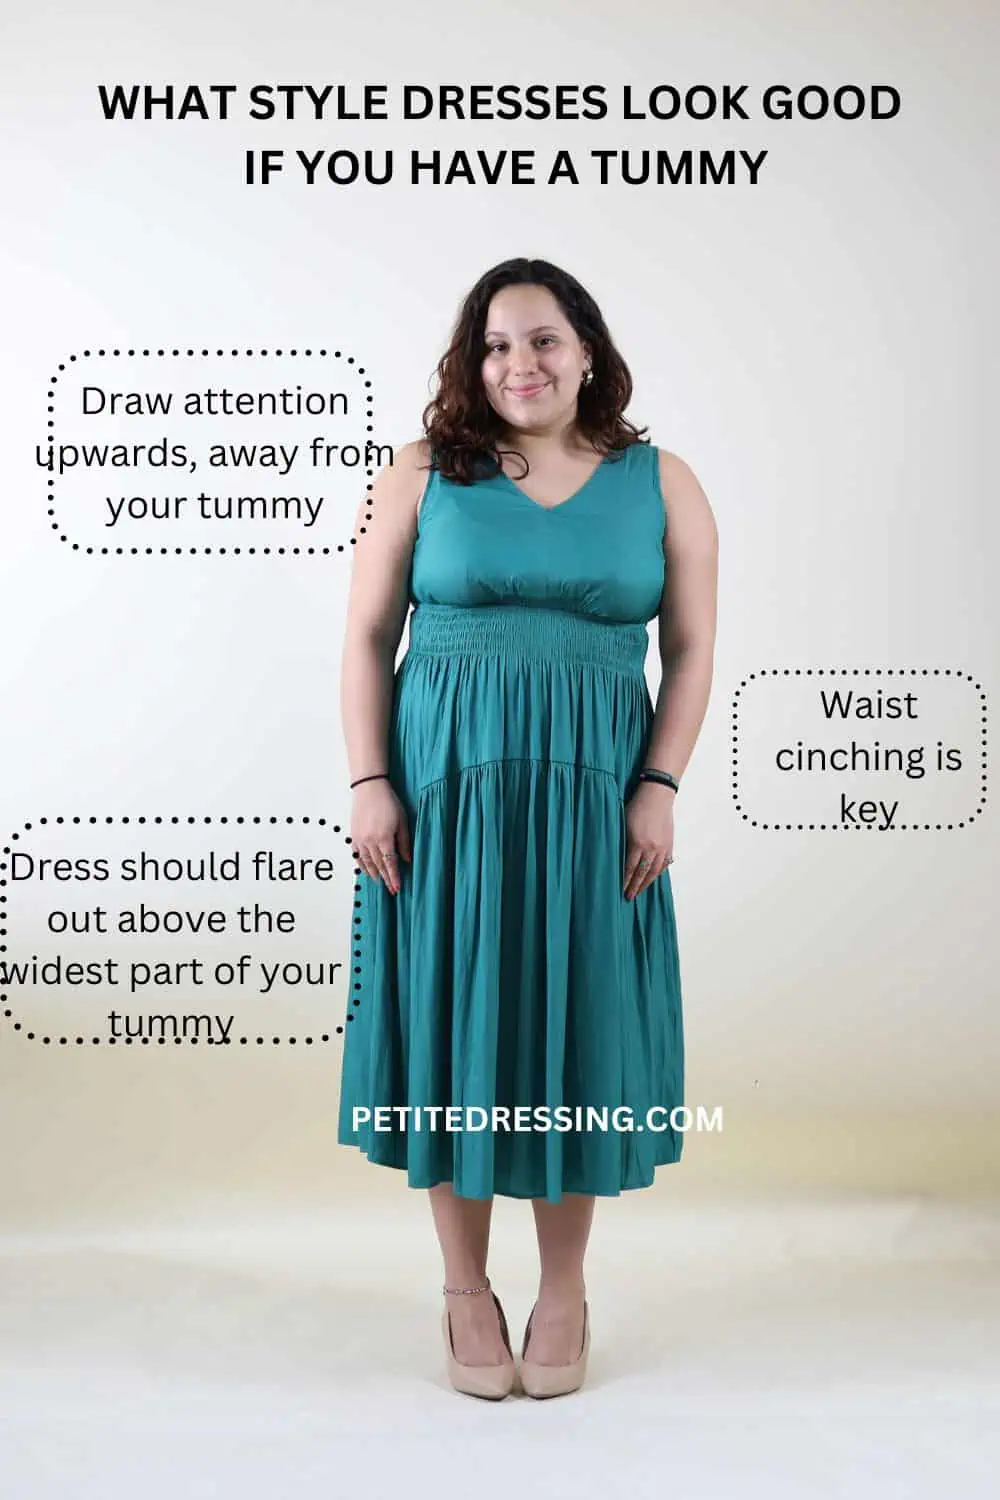 What Style Dress is Best for a Big Belly - Petite Dressing